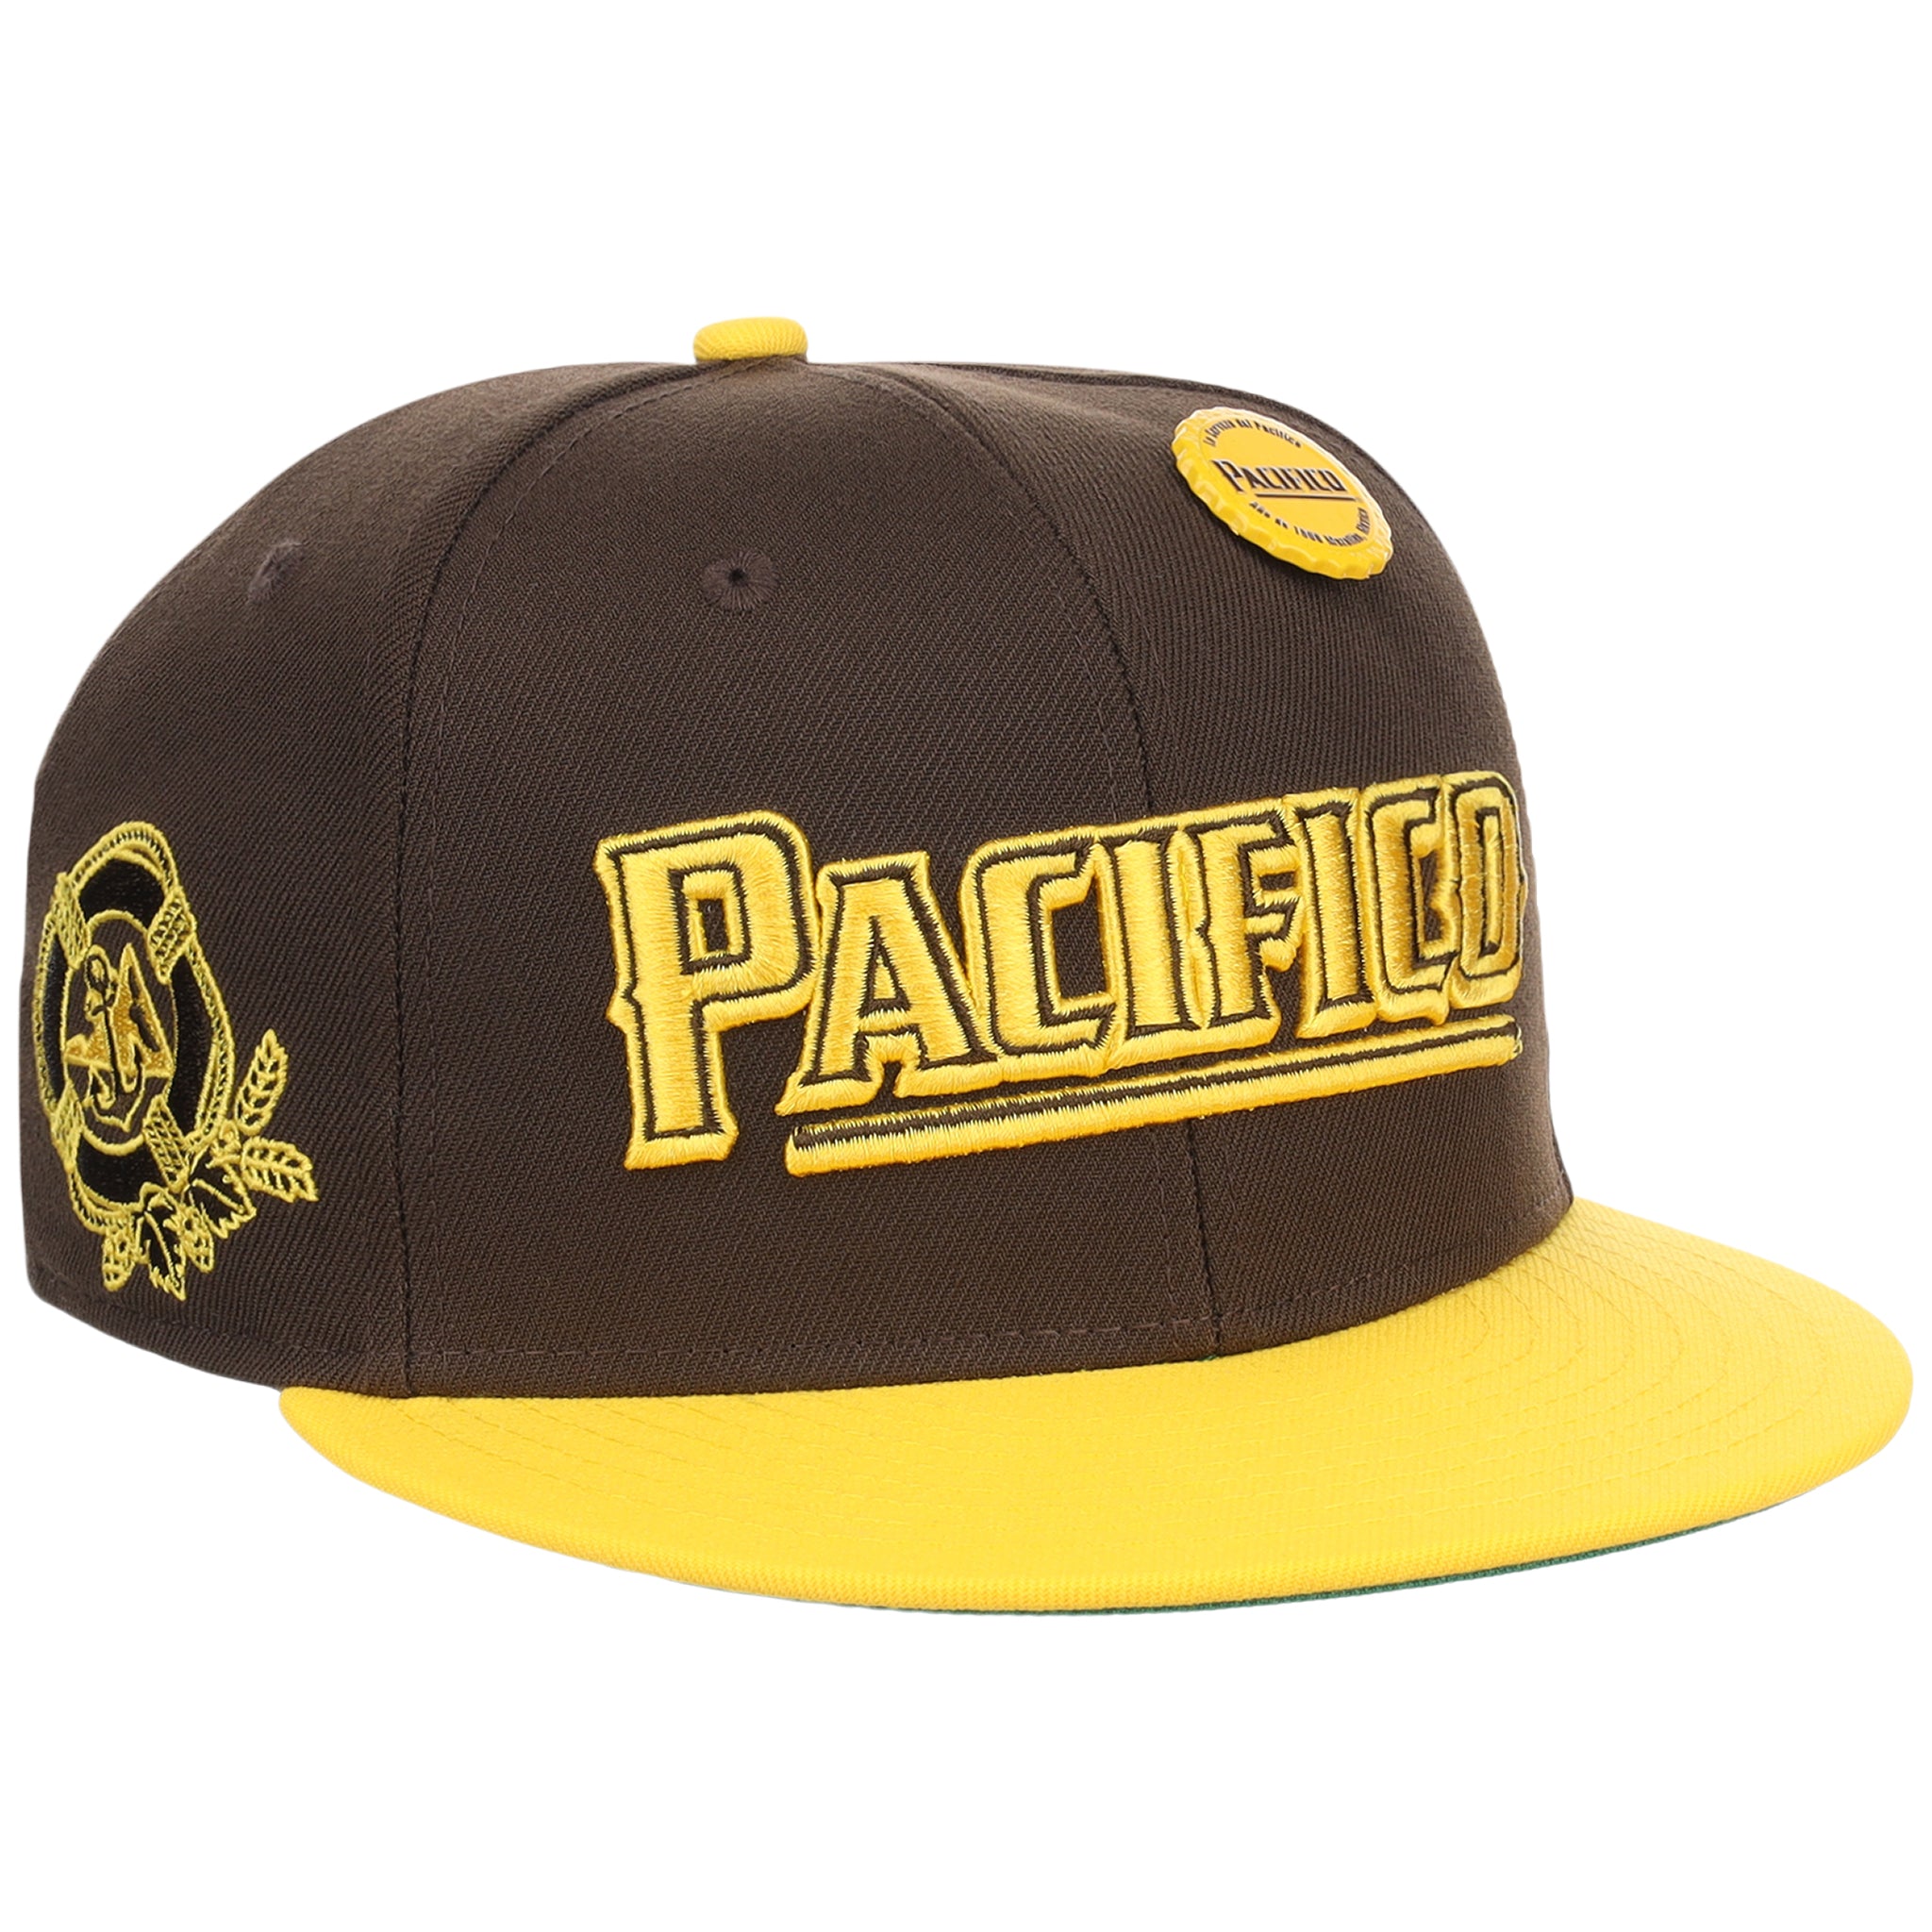 Pacifico Mexican Beer Day Fitted